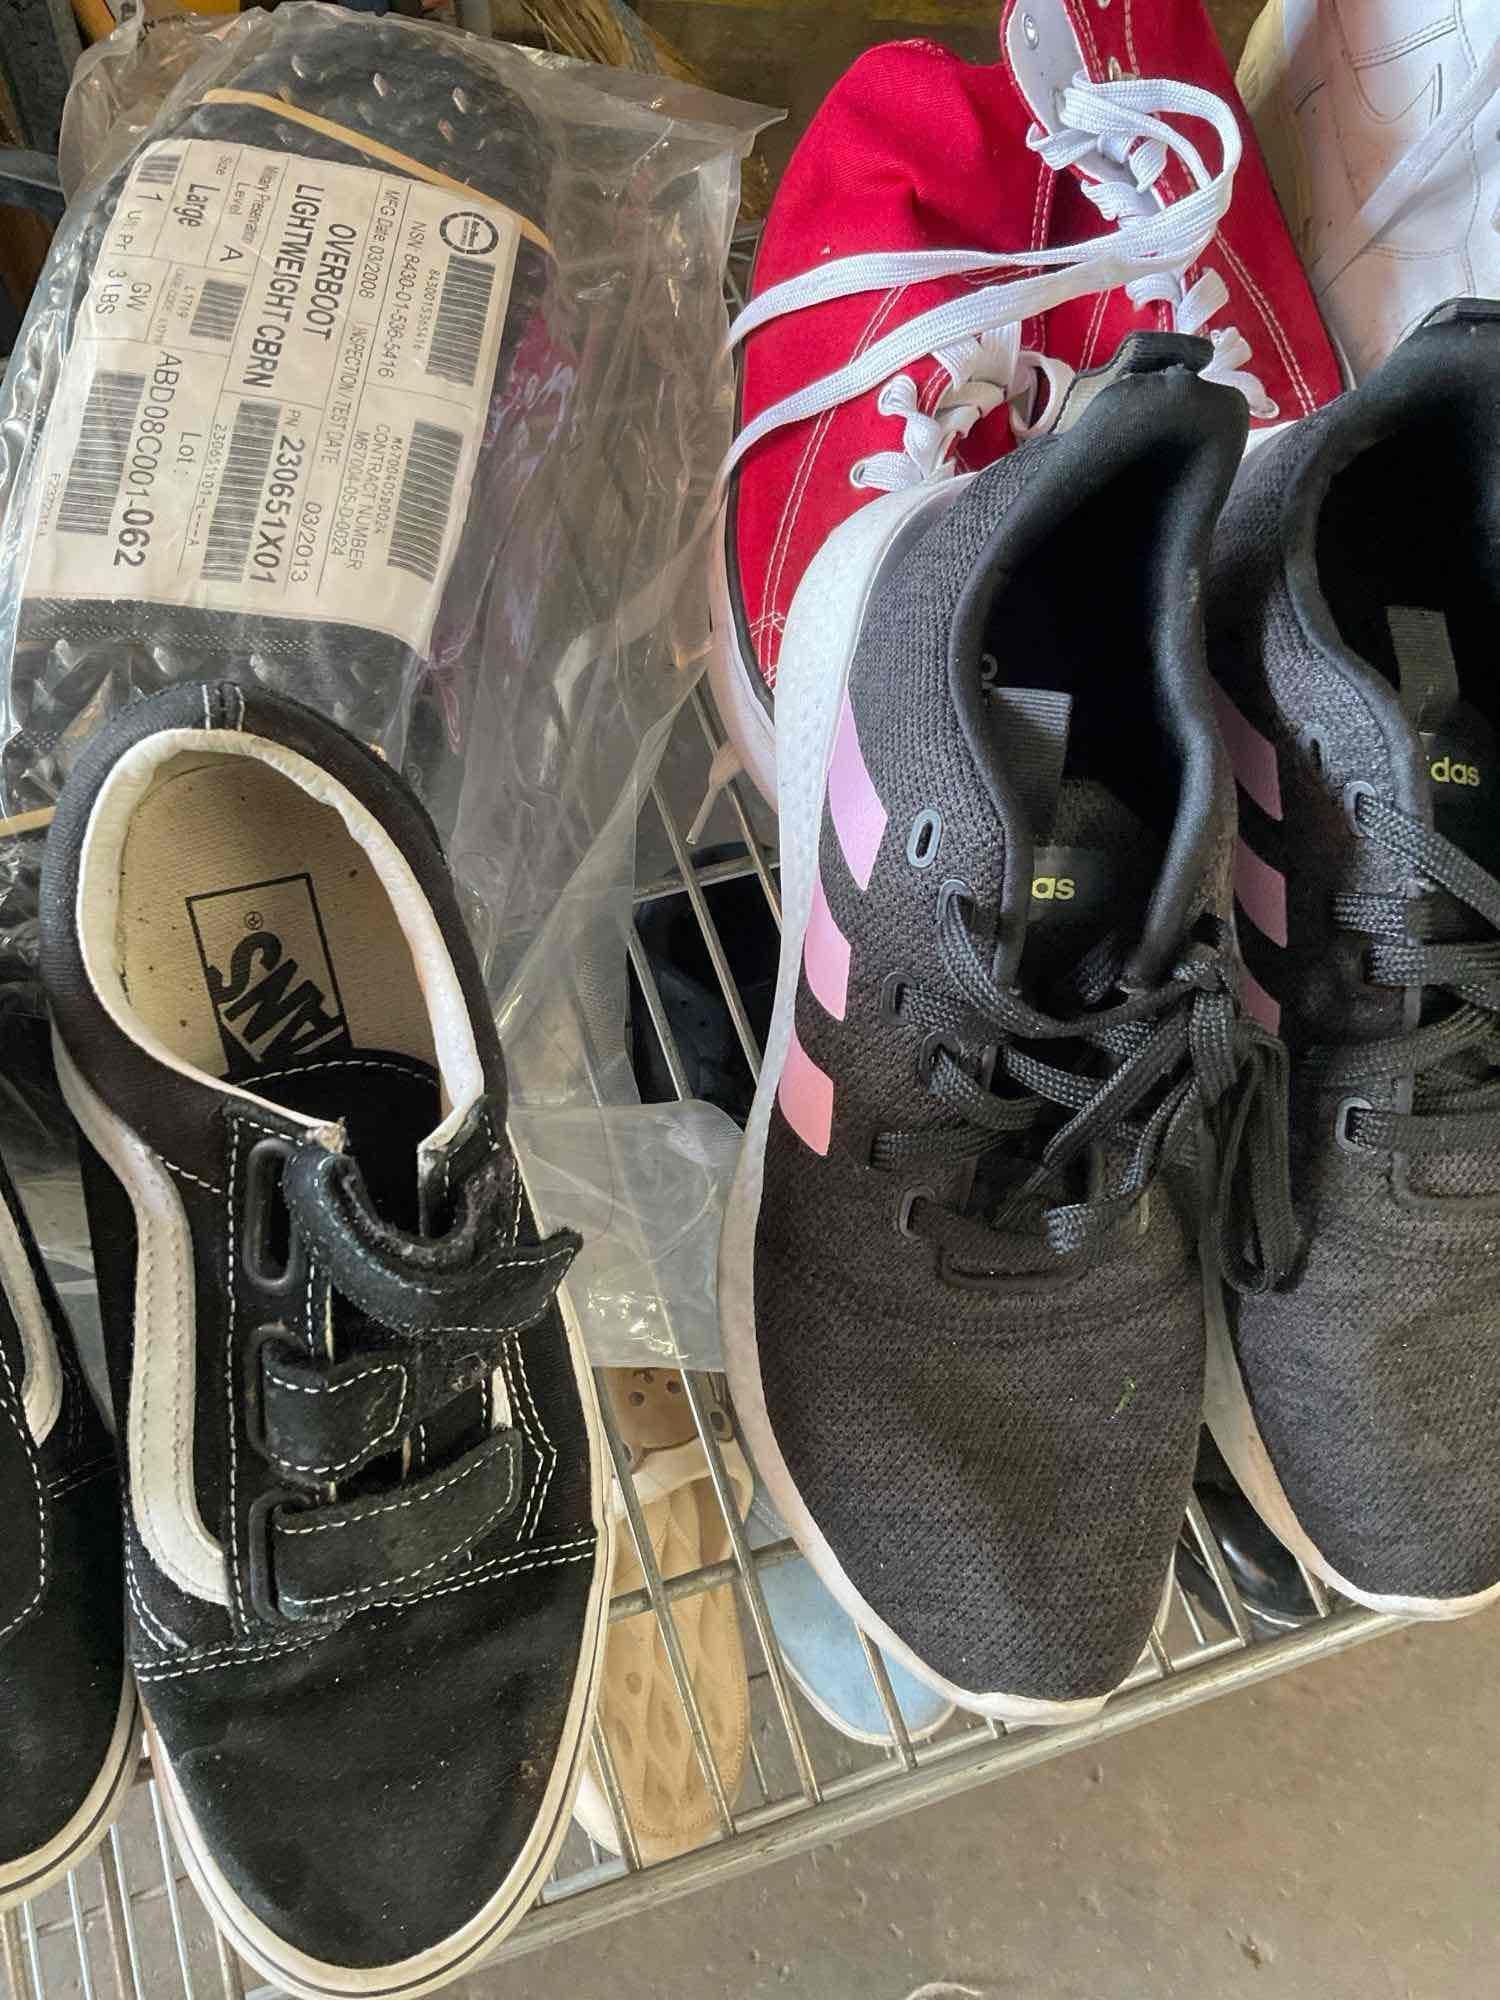 Assorted style, brands, and size shoes. 20 pairs